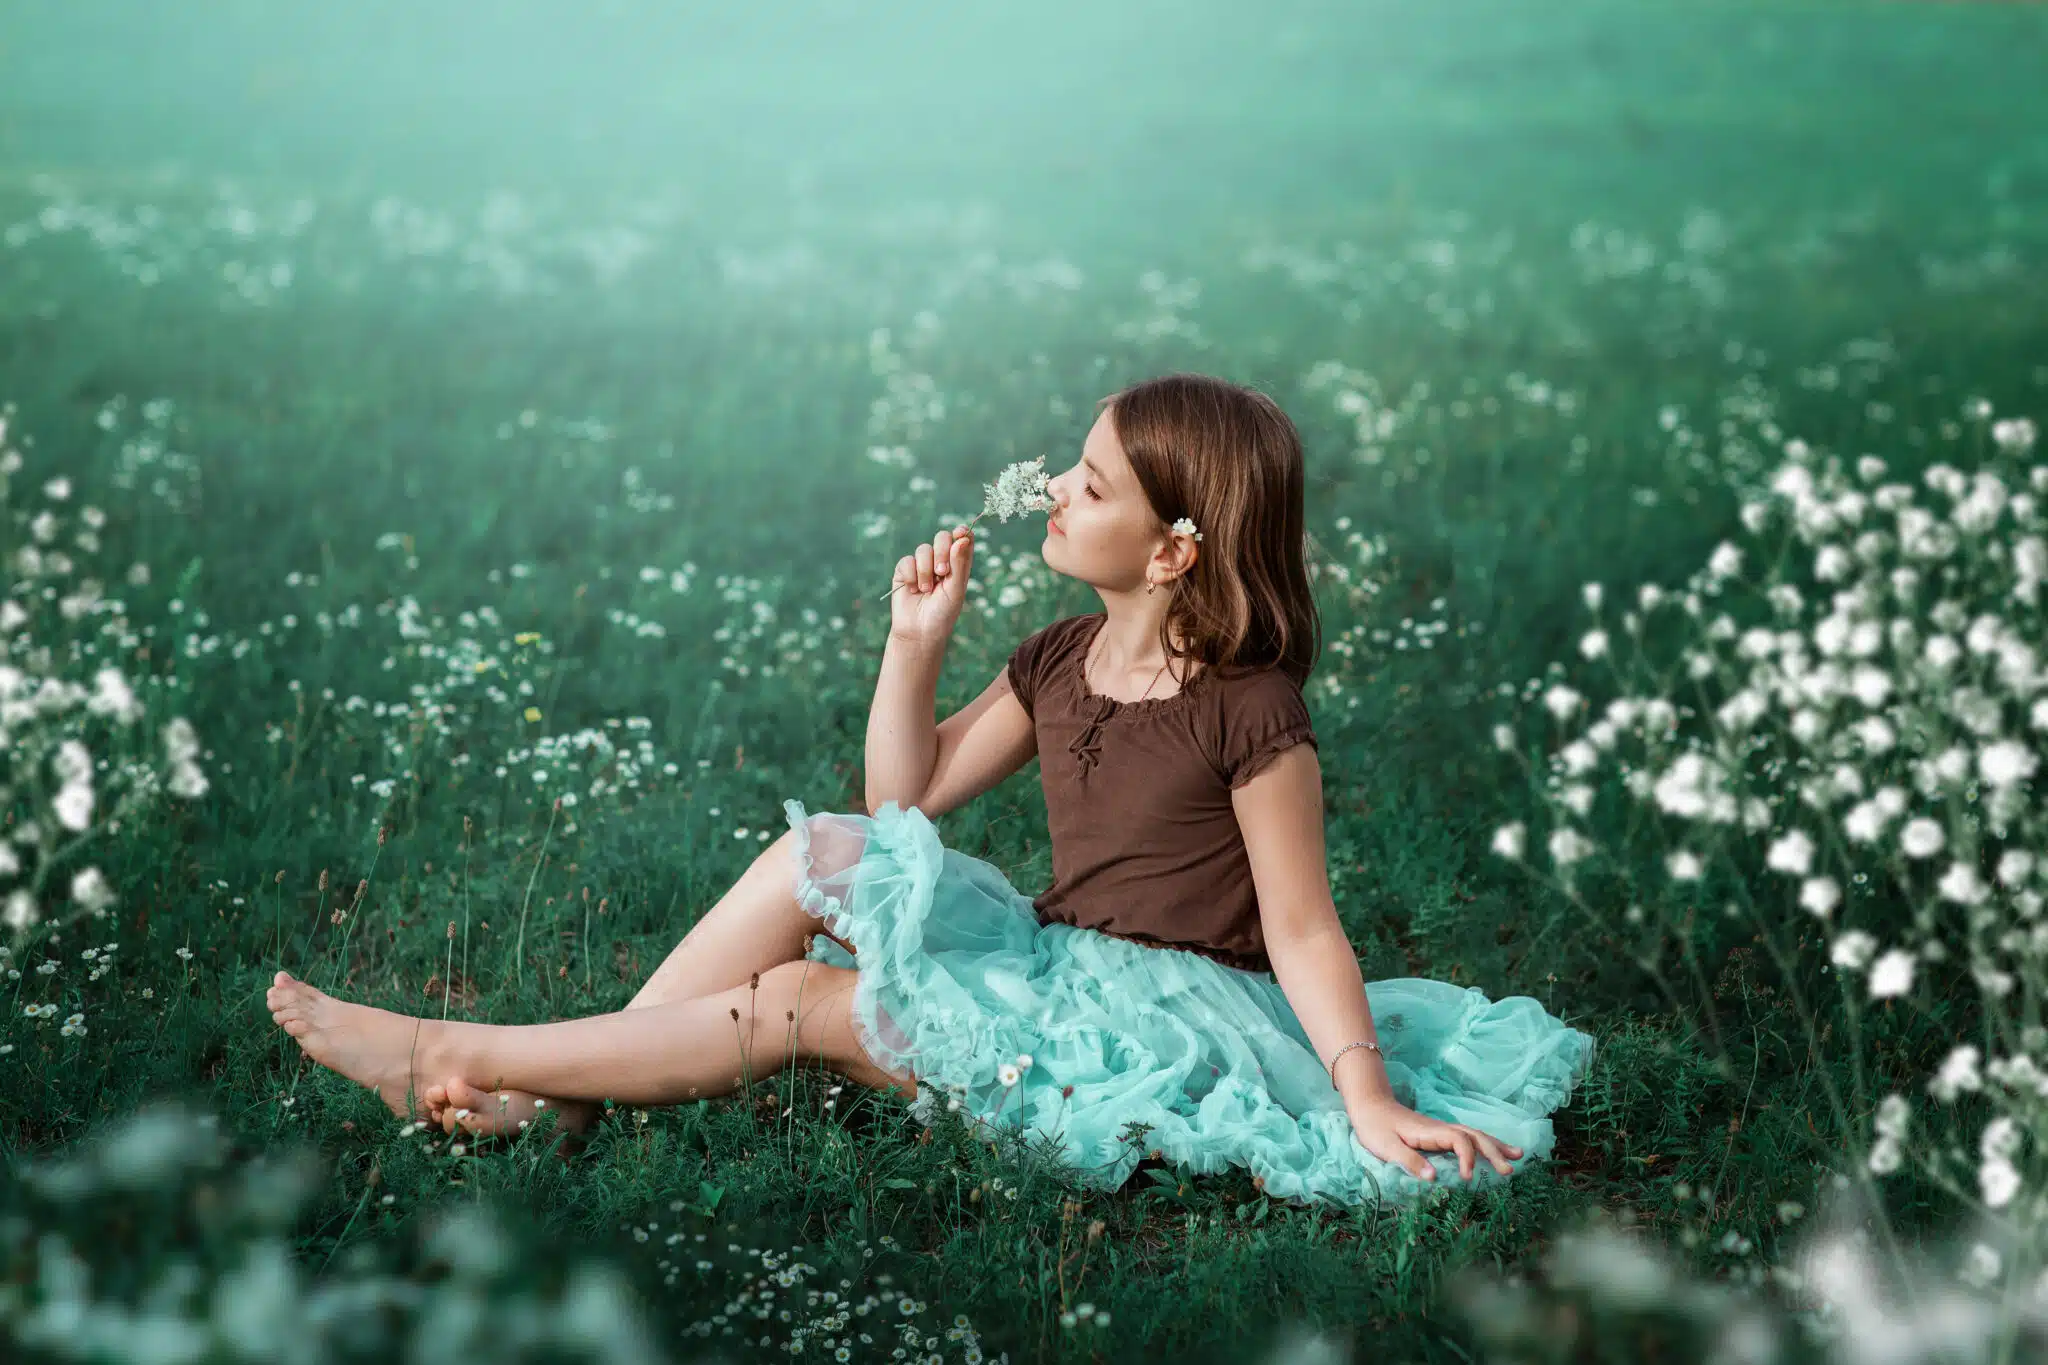 A 10-year-old girl walks in a field with white flowers. 